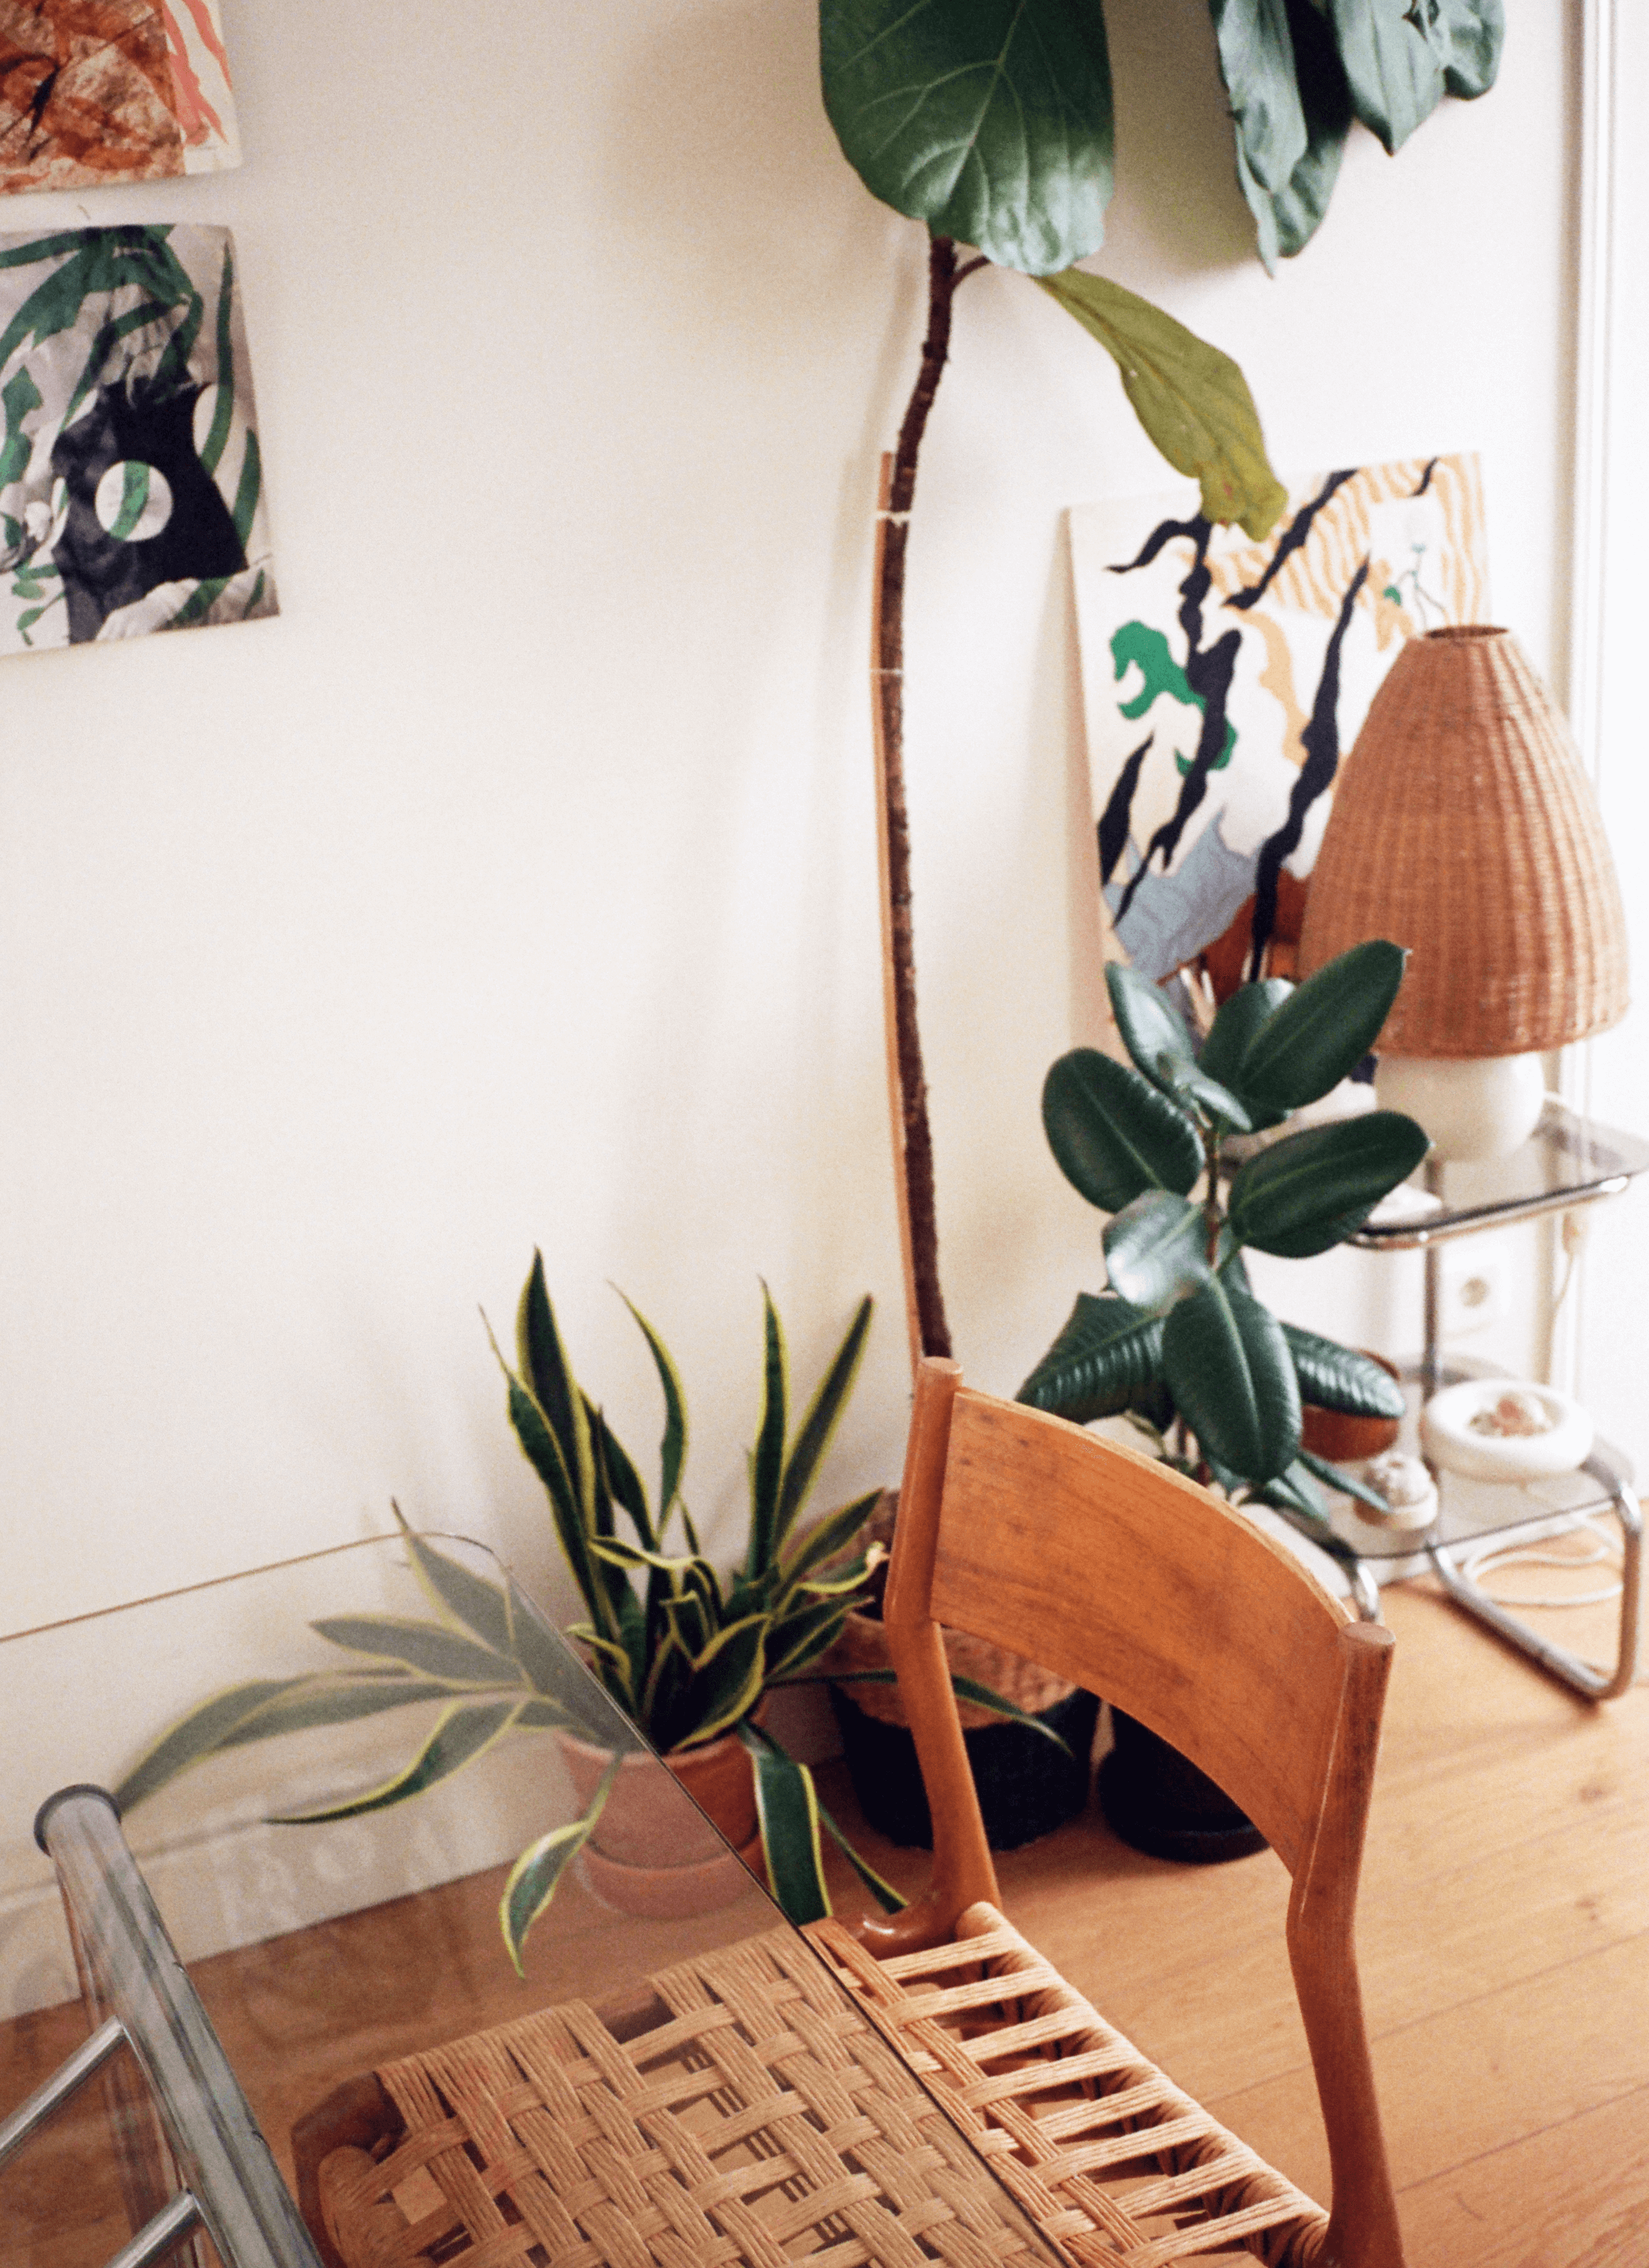 Potted fiddle-leaf fig, rubber fig and snake plant are next to the wall white there is a wooden chair and glass table.